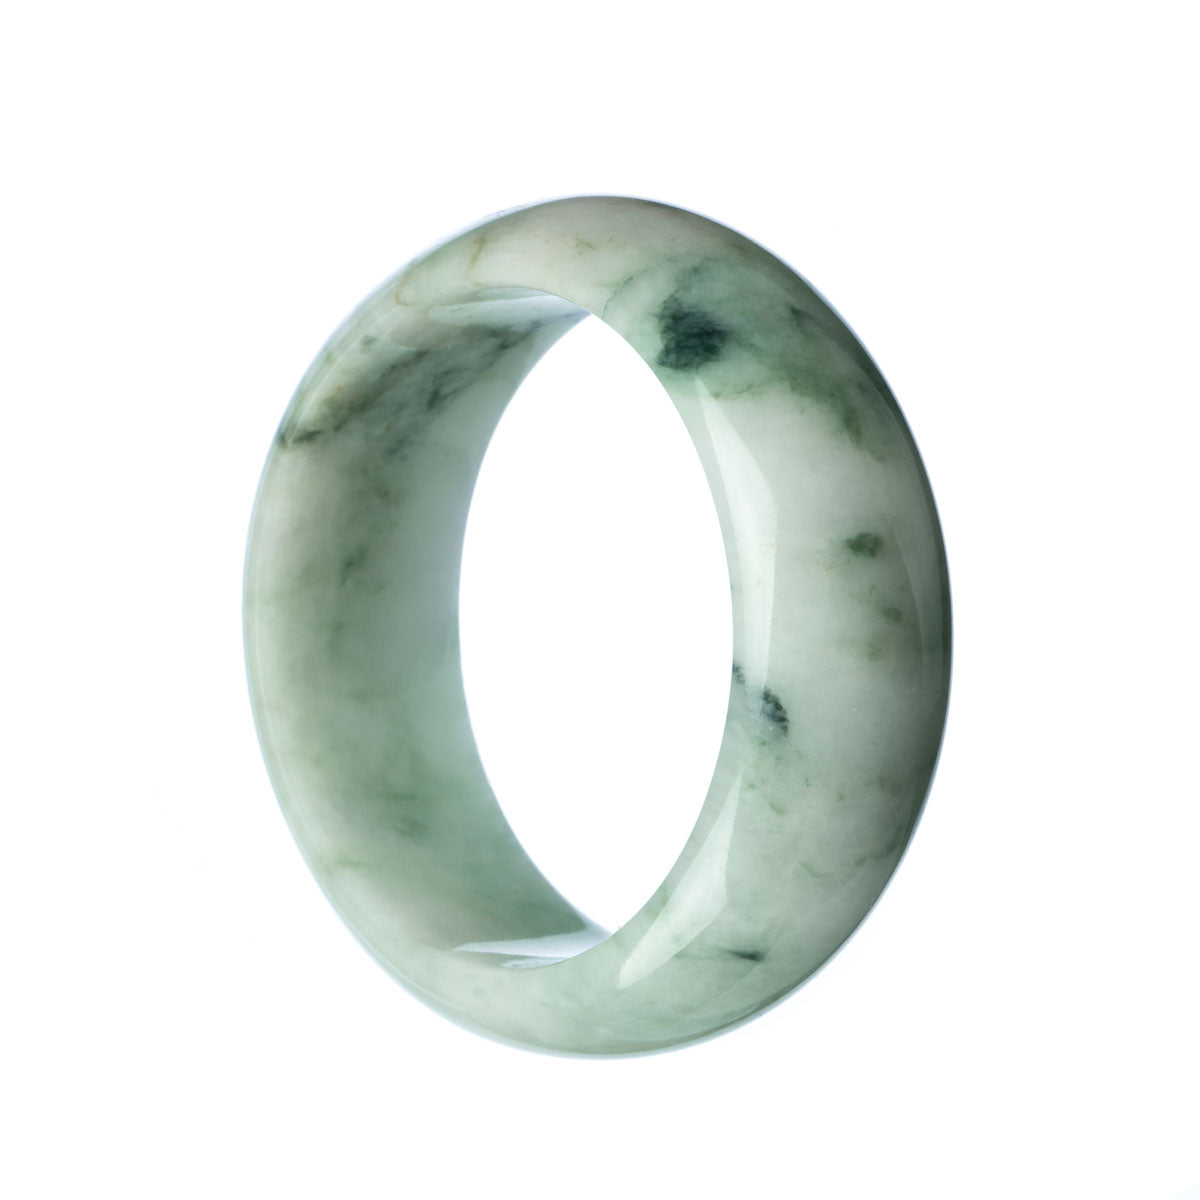 A close-up image of a real untreated pale green Burma jade bangle. The bangle is flat and measures 58mm in diameter. It features a smooth texture and a soothing green color.